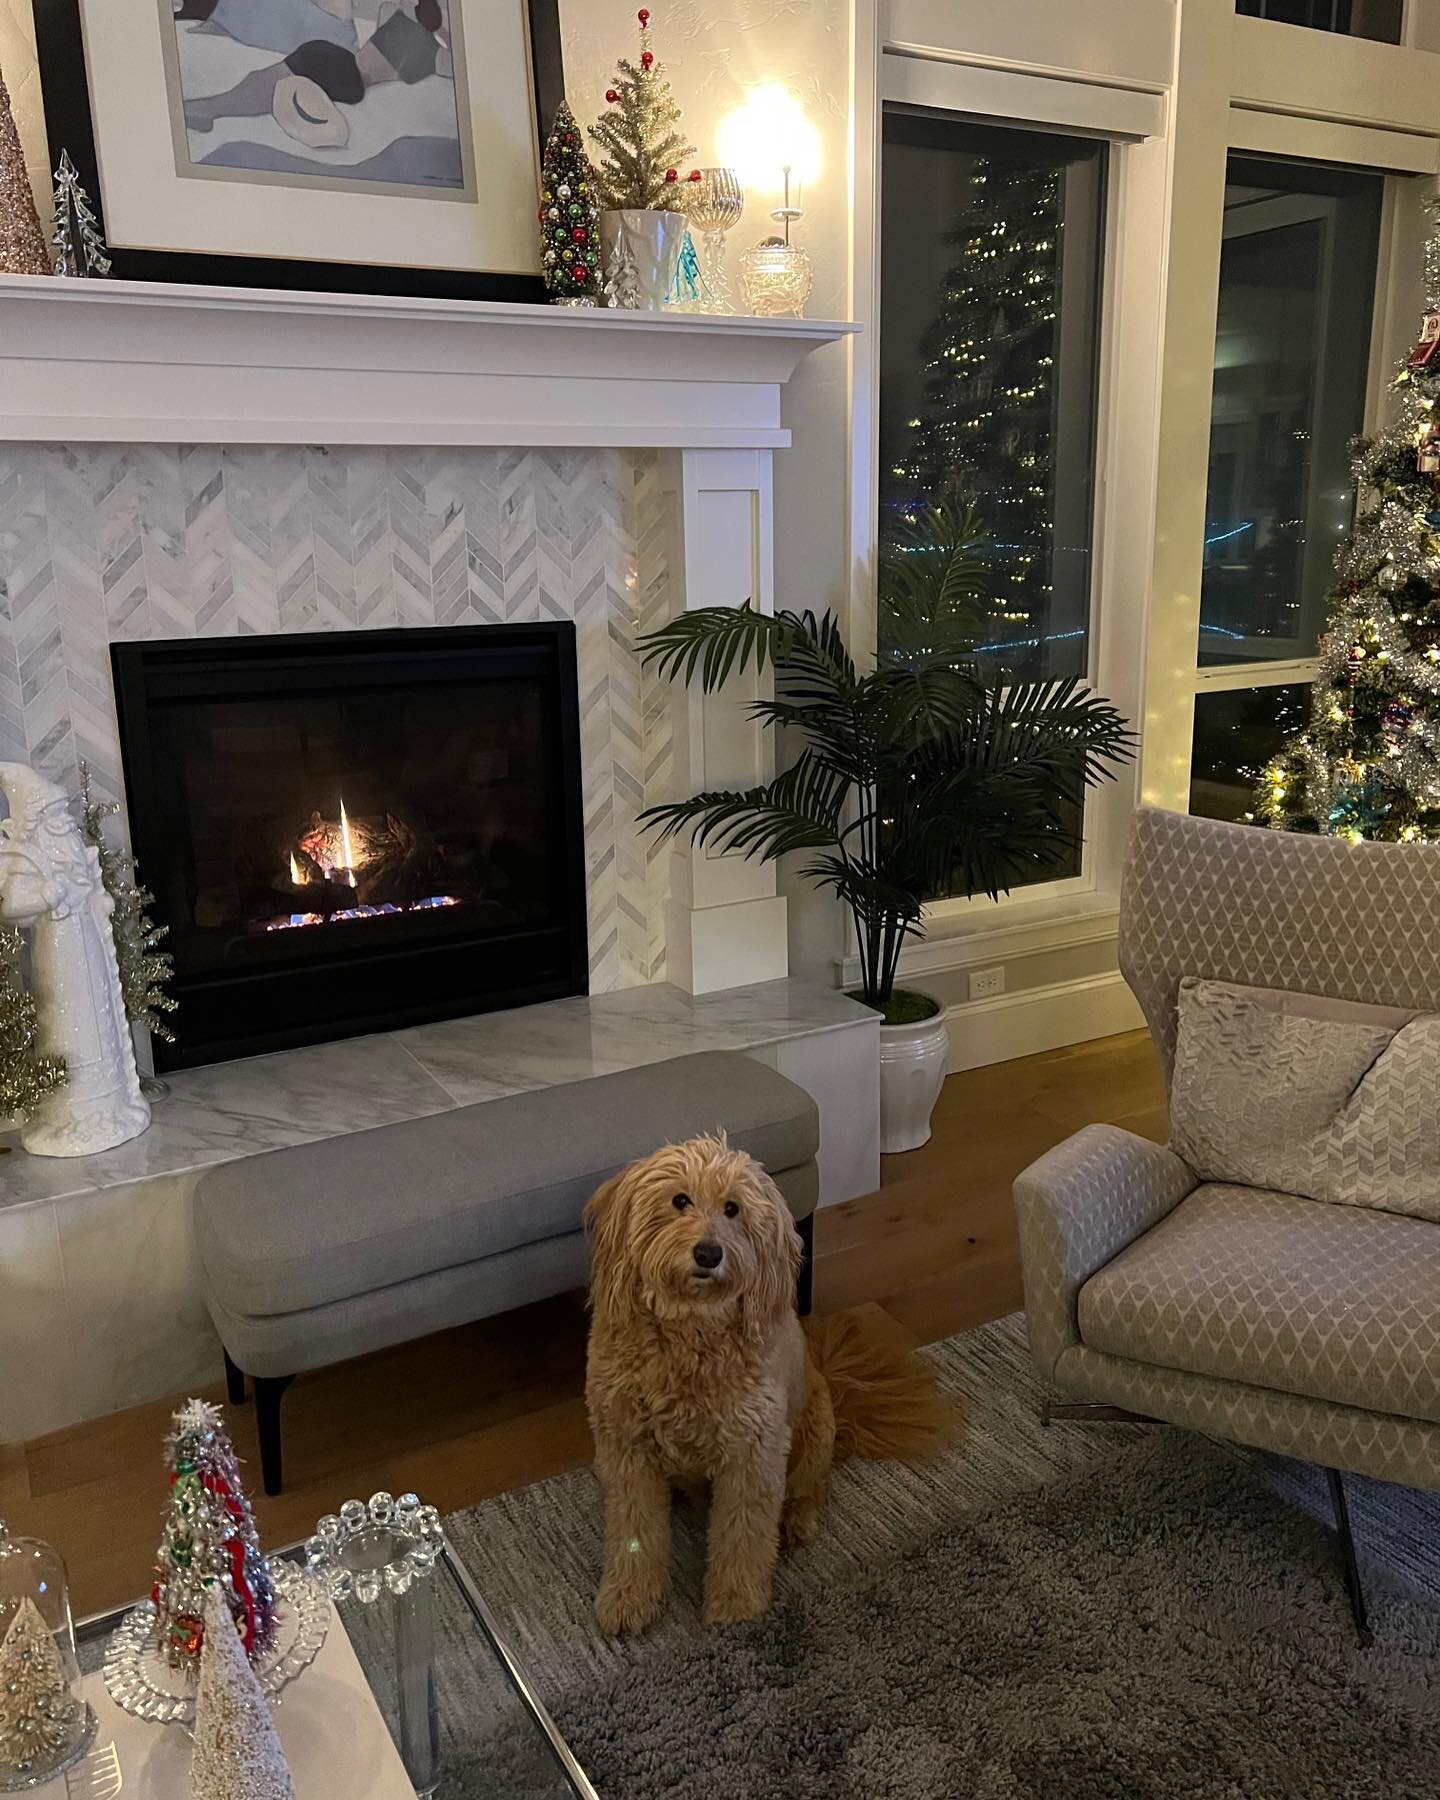 holidays are here &amp; filled with our favorite things!🎄❤️🍗 #WCGD
#winecountrygoldendoodles